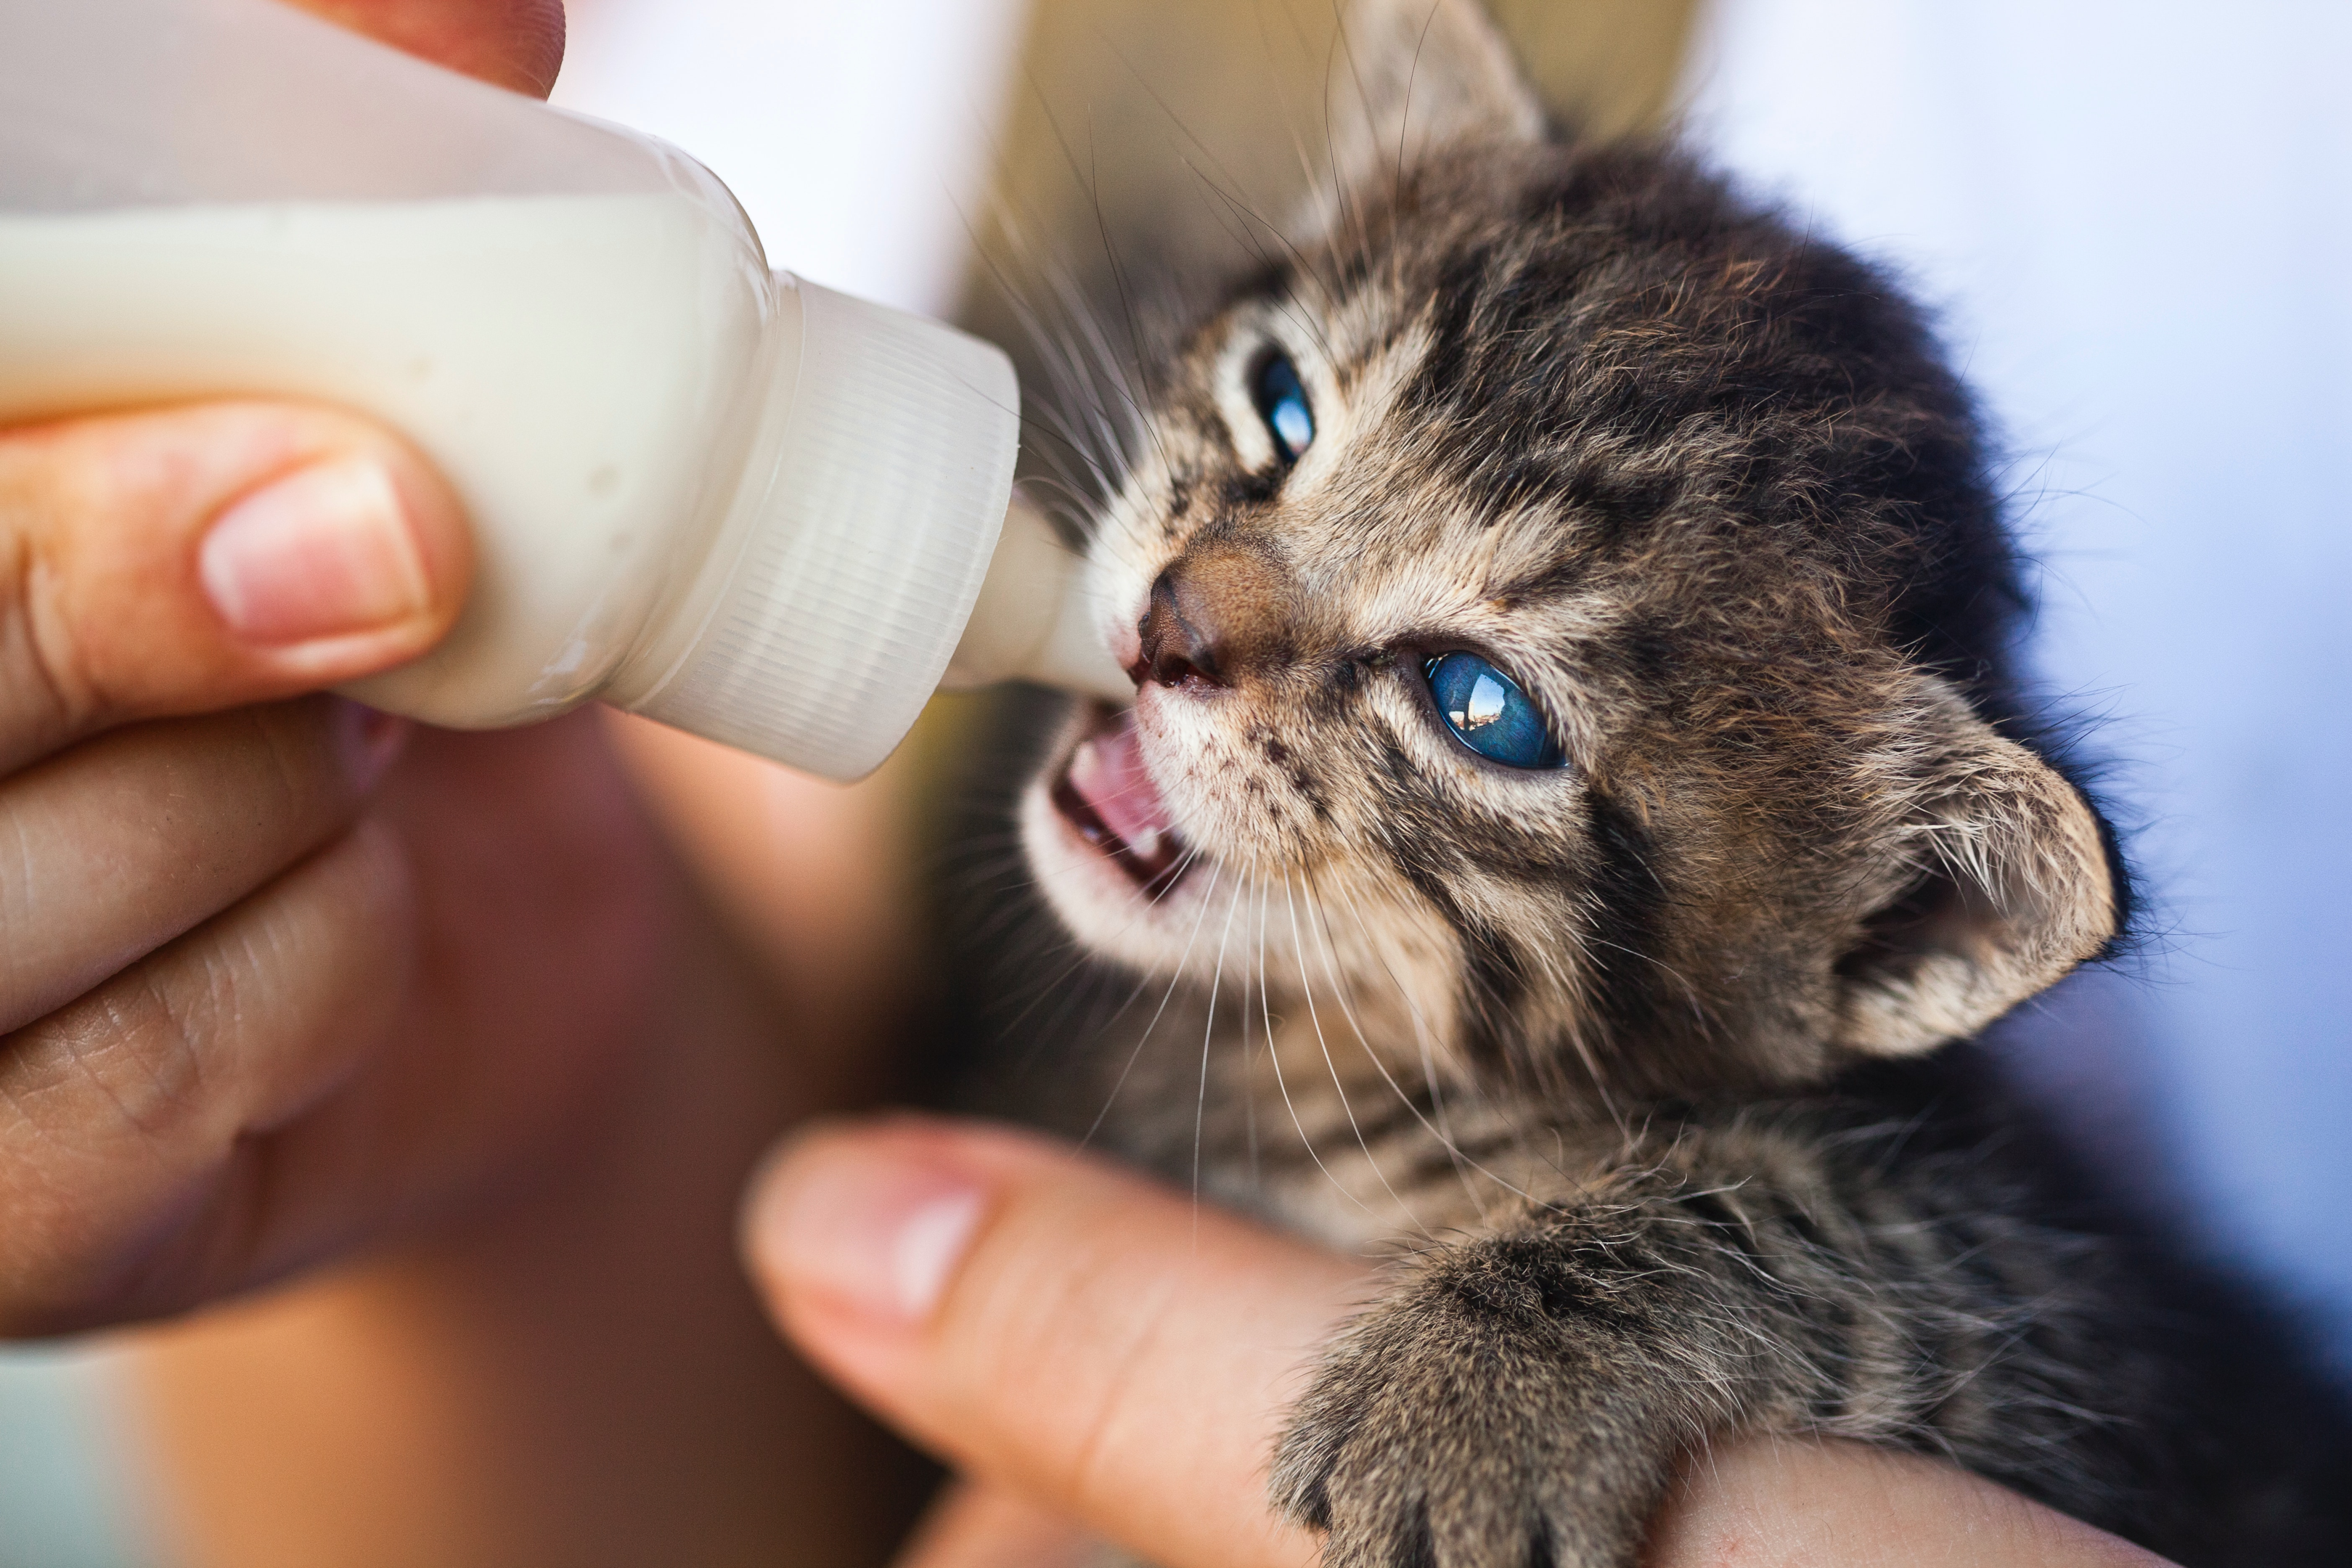 Souce: https://www.pexels.com/photo/close-up-photo-of-person-feeding-a-kitten-1981111/